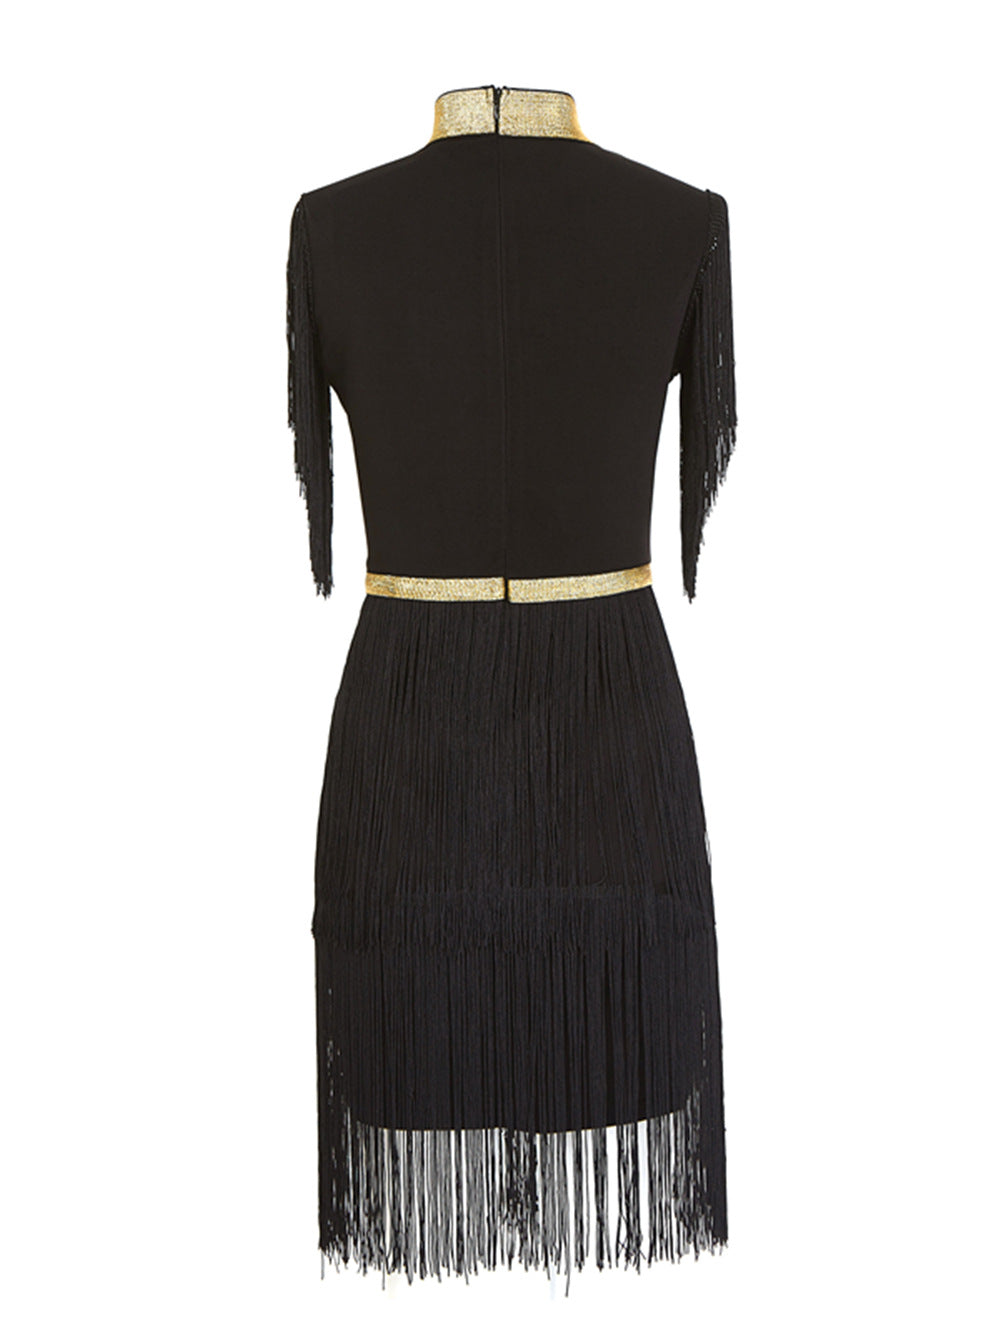 Roxy Black And Gold Bandage Dress With Tassels - steven wick